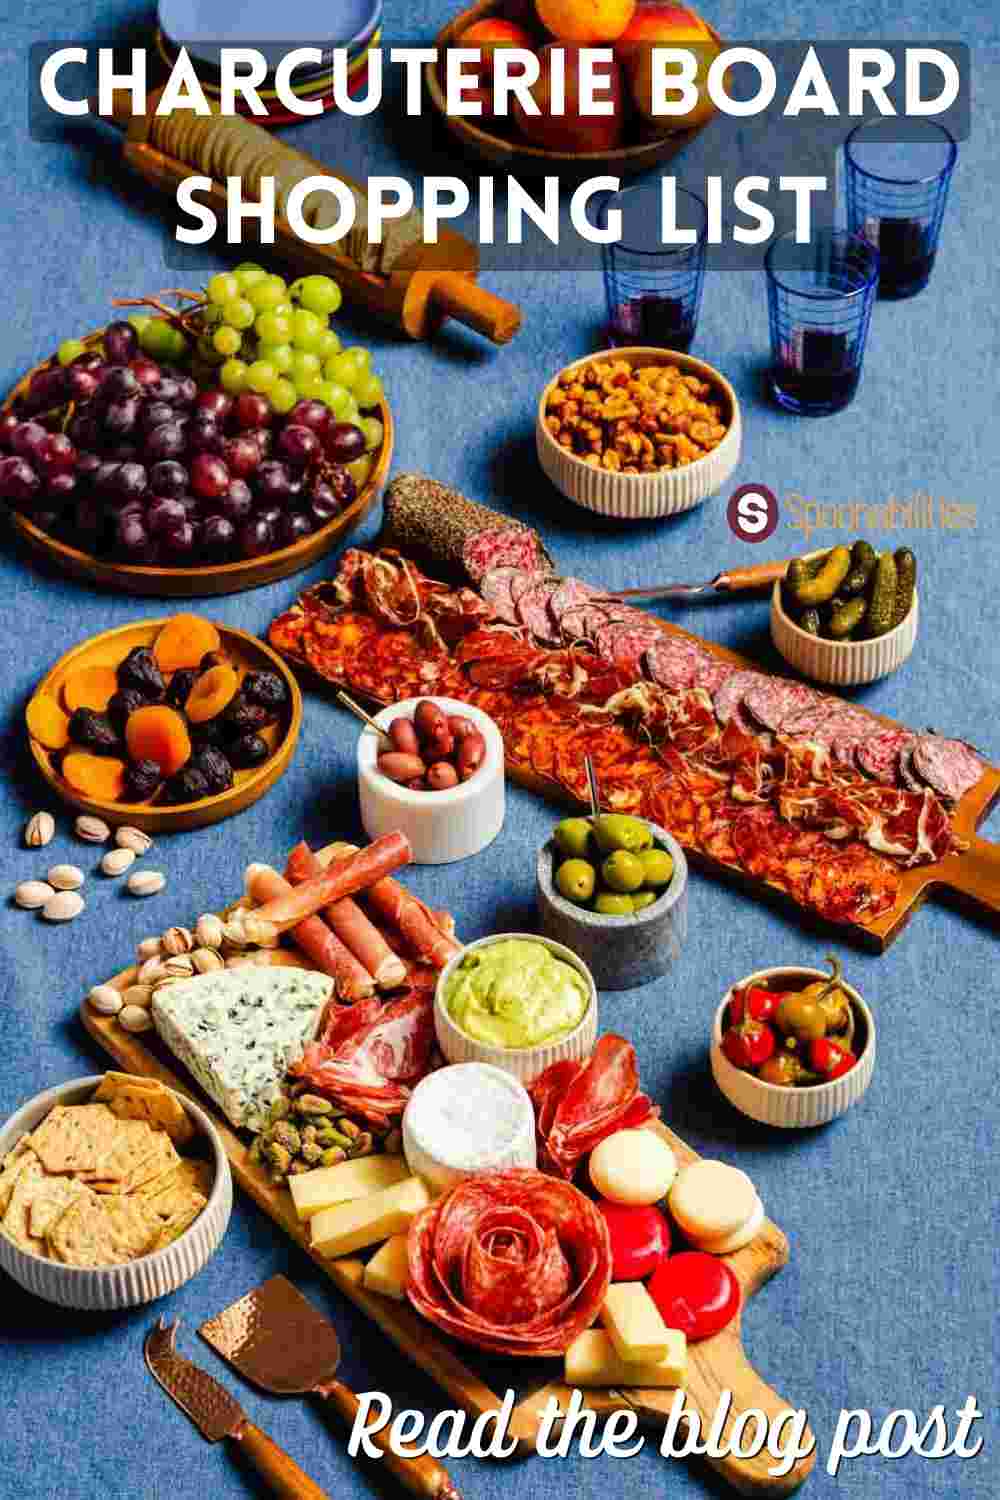 Charcuterie Board Shopping List - How to Shop for a Great Appetizer Experience